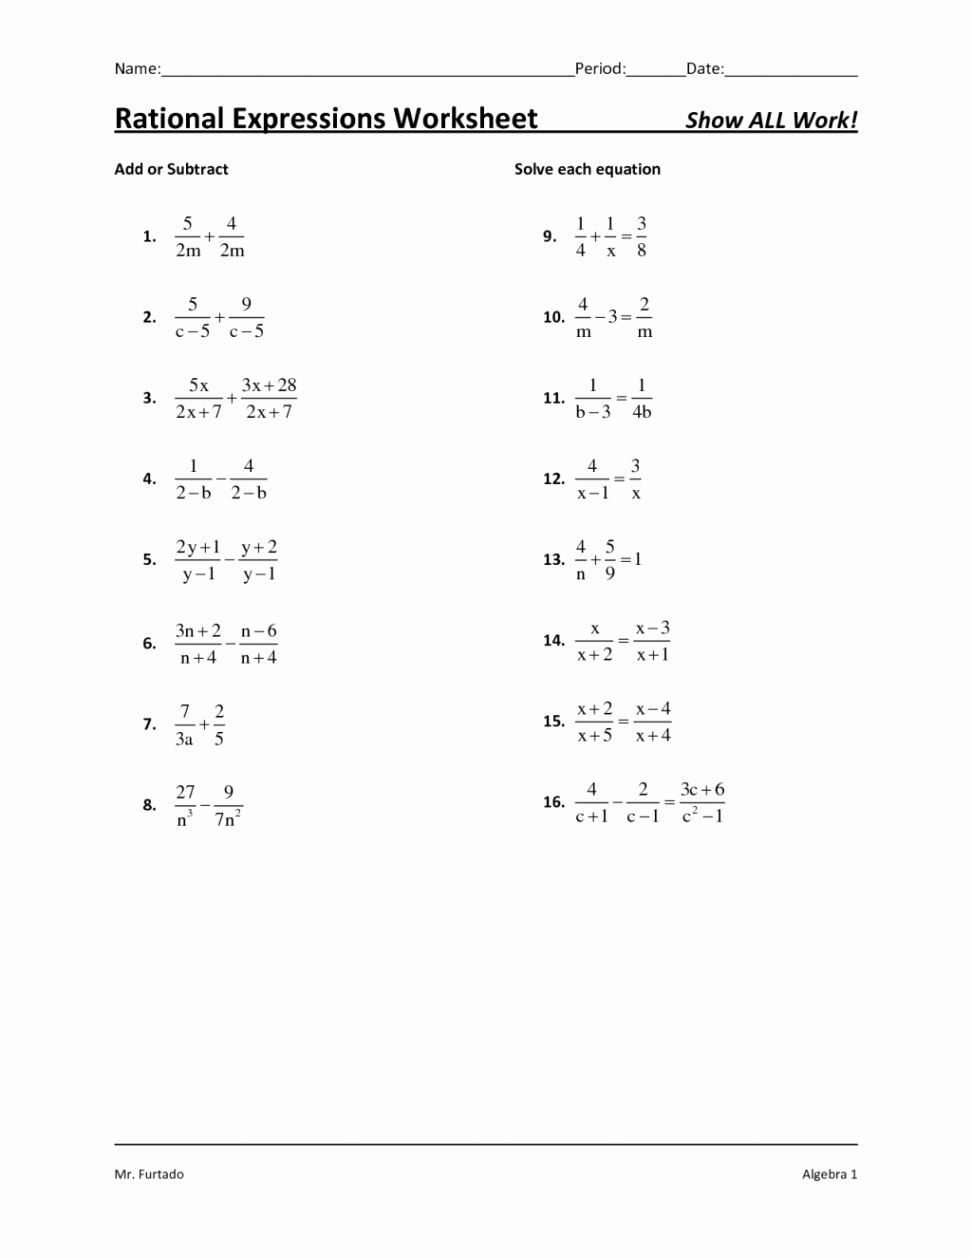 Rational Expressions Worksheet Answers Inspirational Adding Subtracting Multiplying and Dividing Radicals